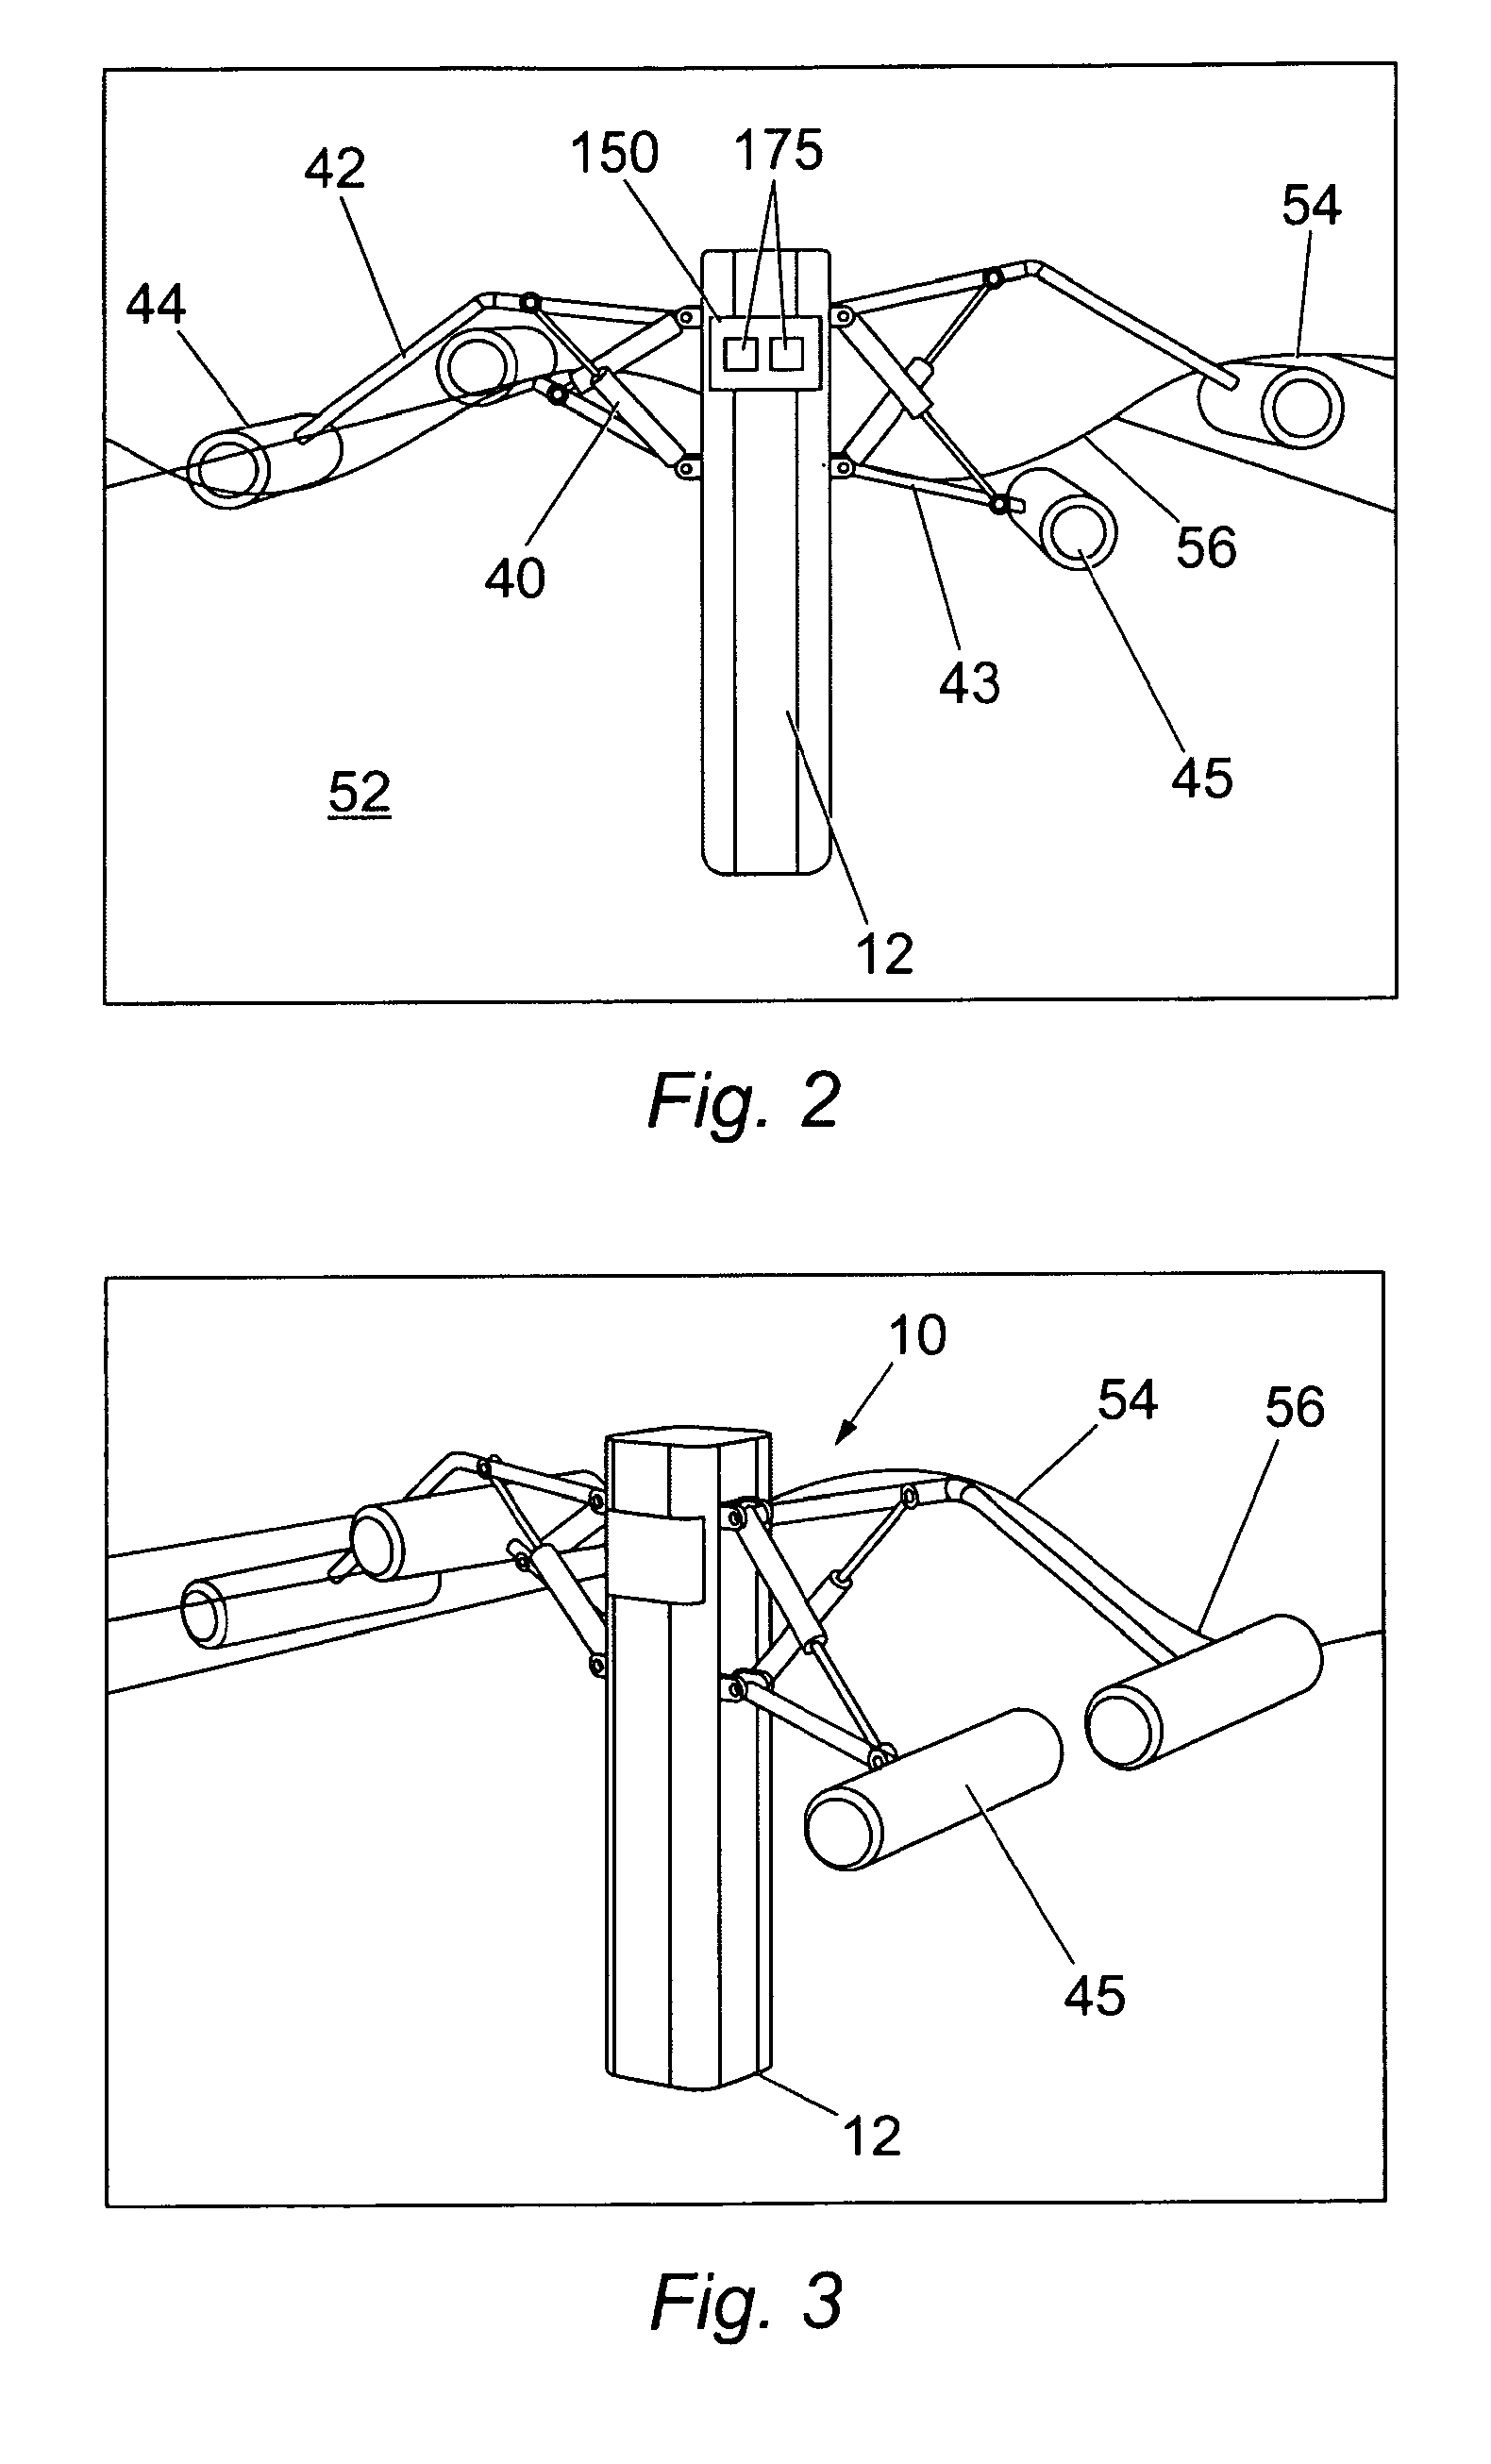 Method and apparatus for energy generation from wave motion